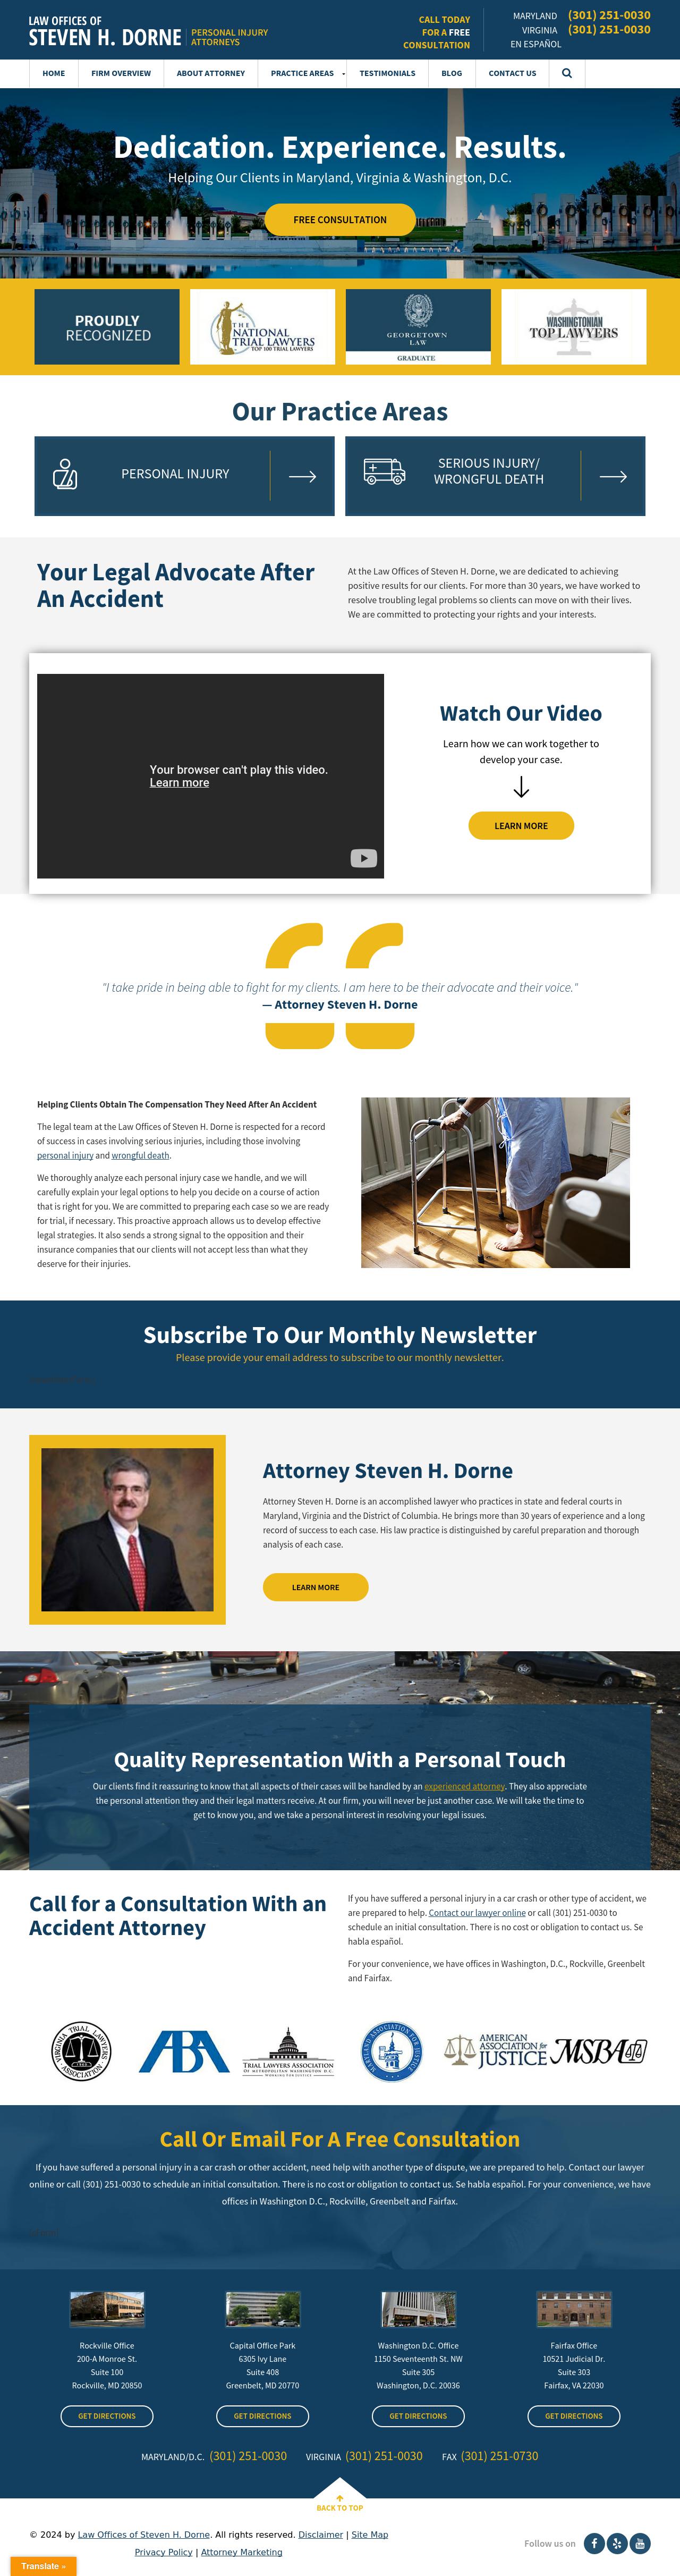 Law Offices of Steven H. Dorne - Greeneblt MD Lawyers